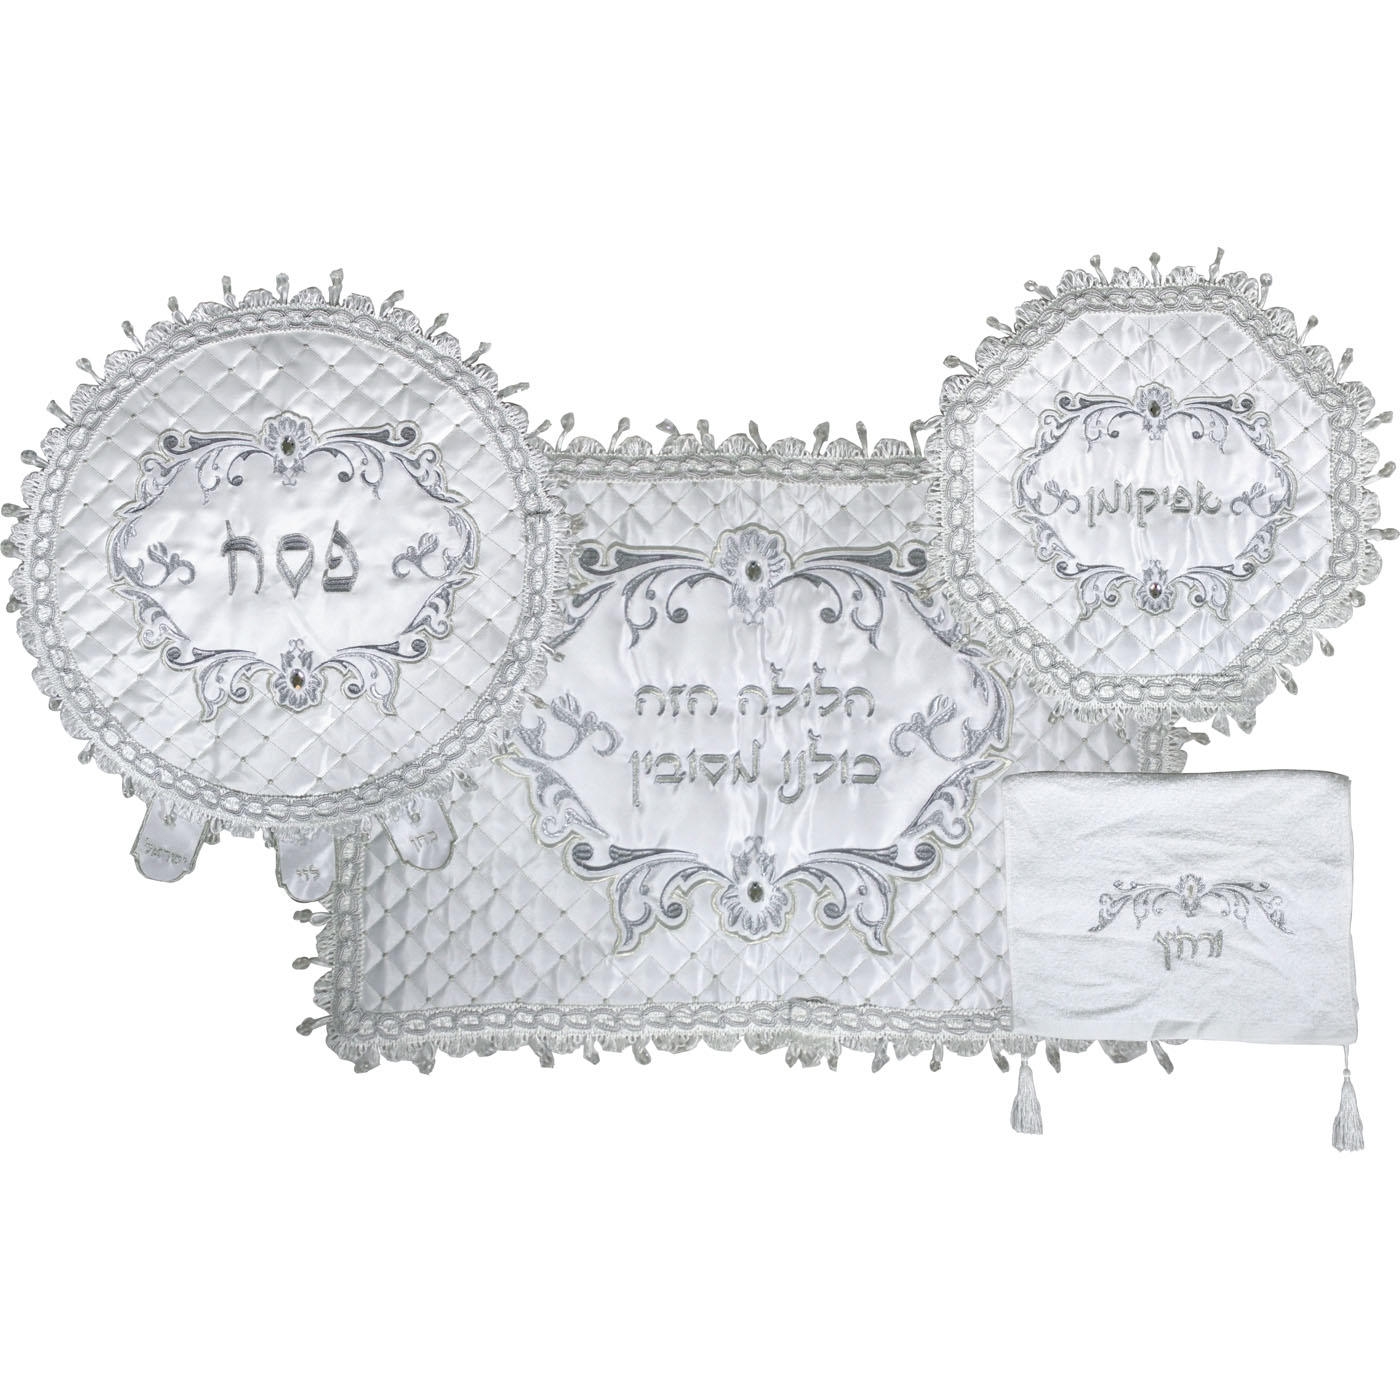 Complete Seder Set - Tasseled and Quilted - 1